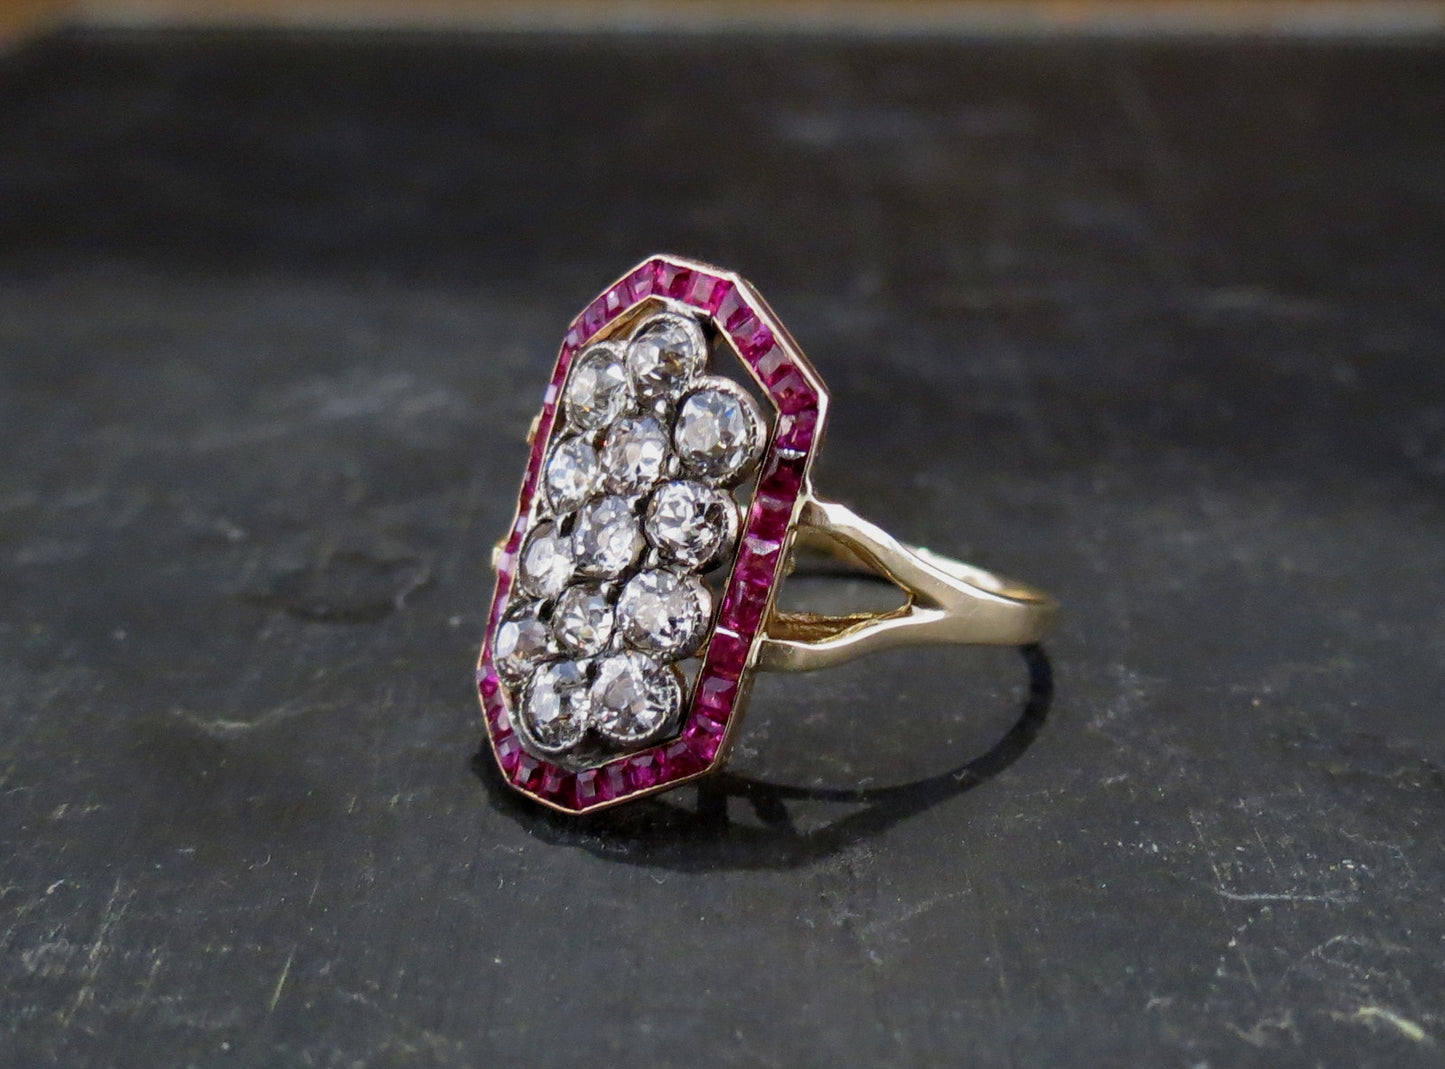 SOLD--Edwardian Old Mine Diamond and Ruby Cluster Ring 14k/Silver c. 1915